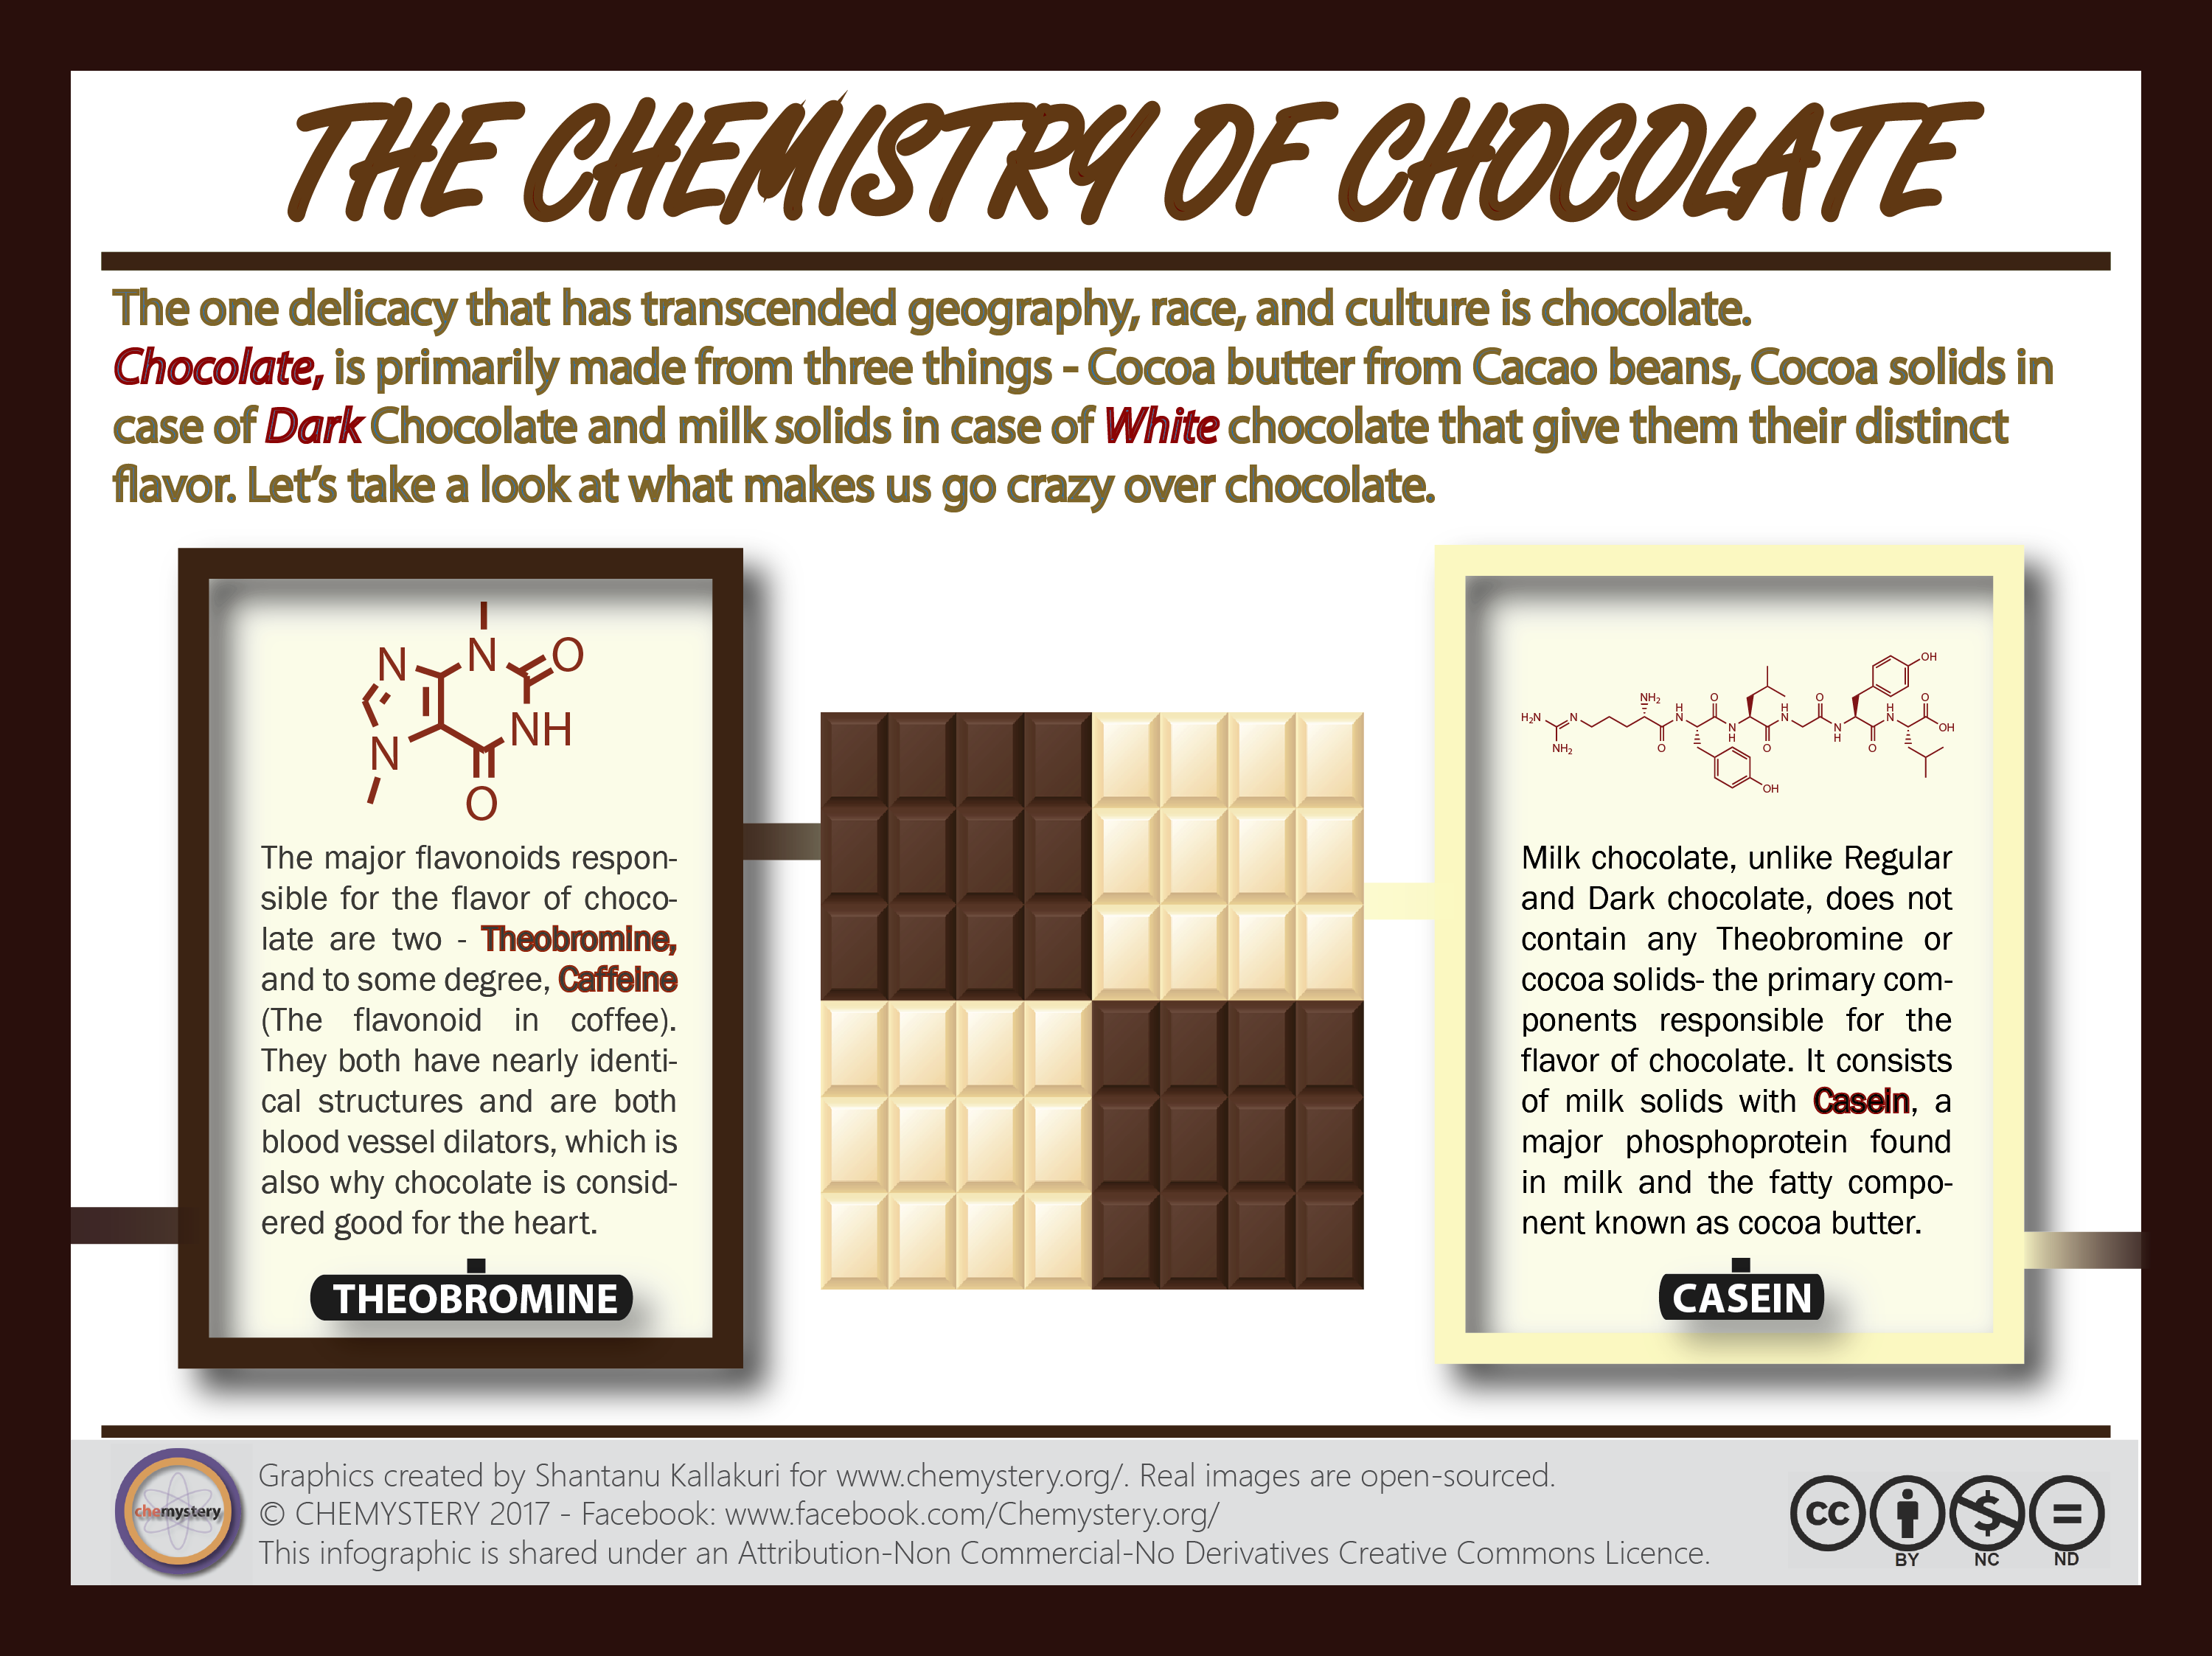 5. The Chemystery of Chocolate!